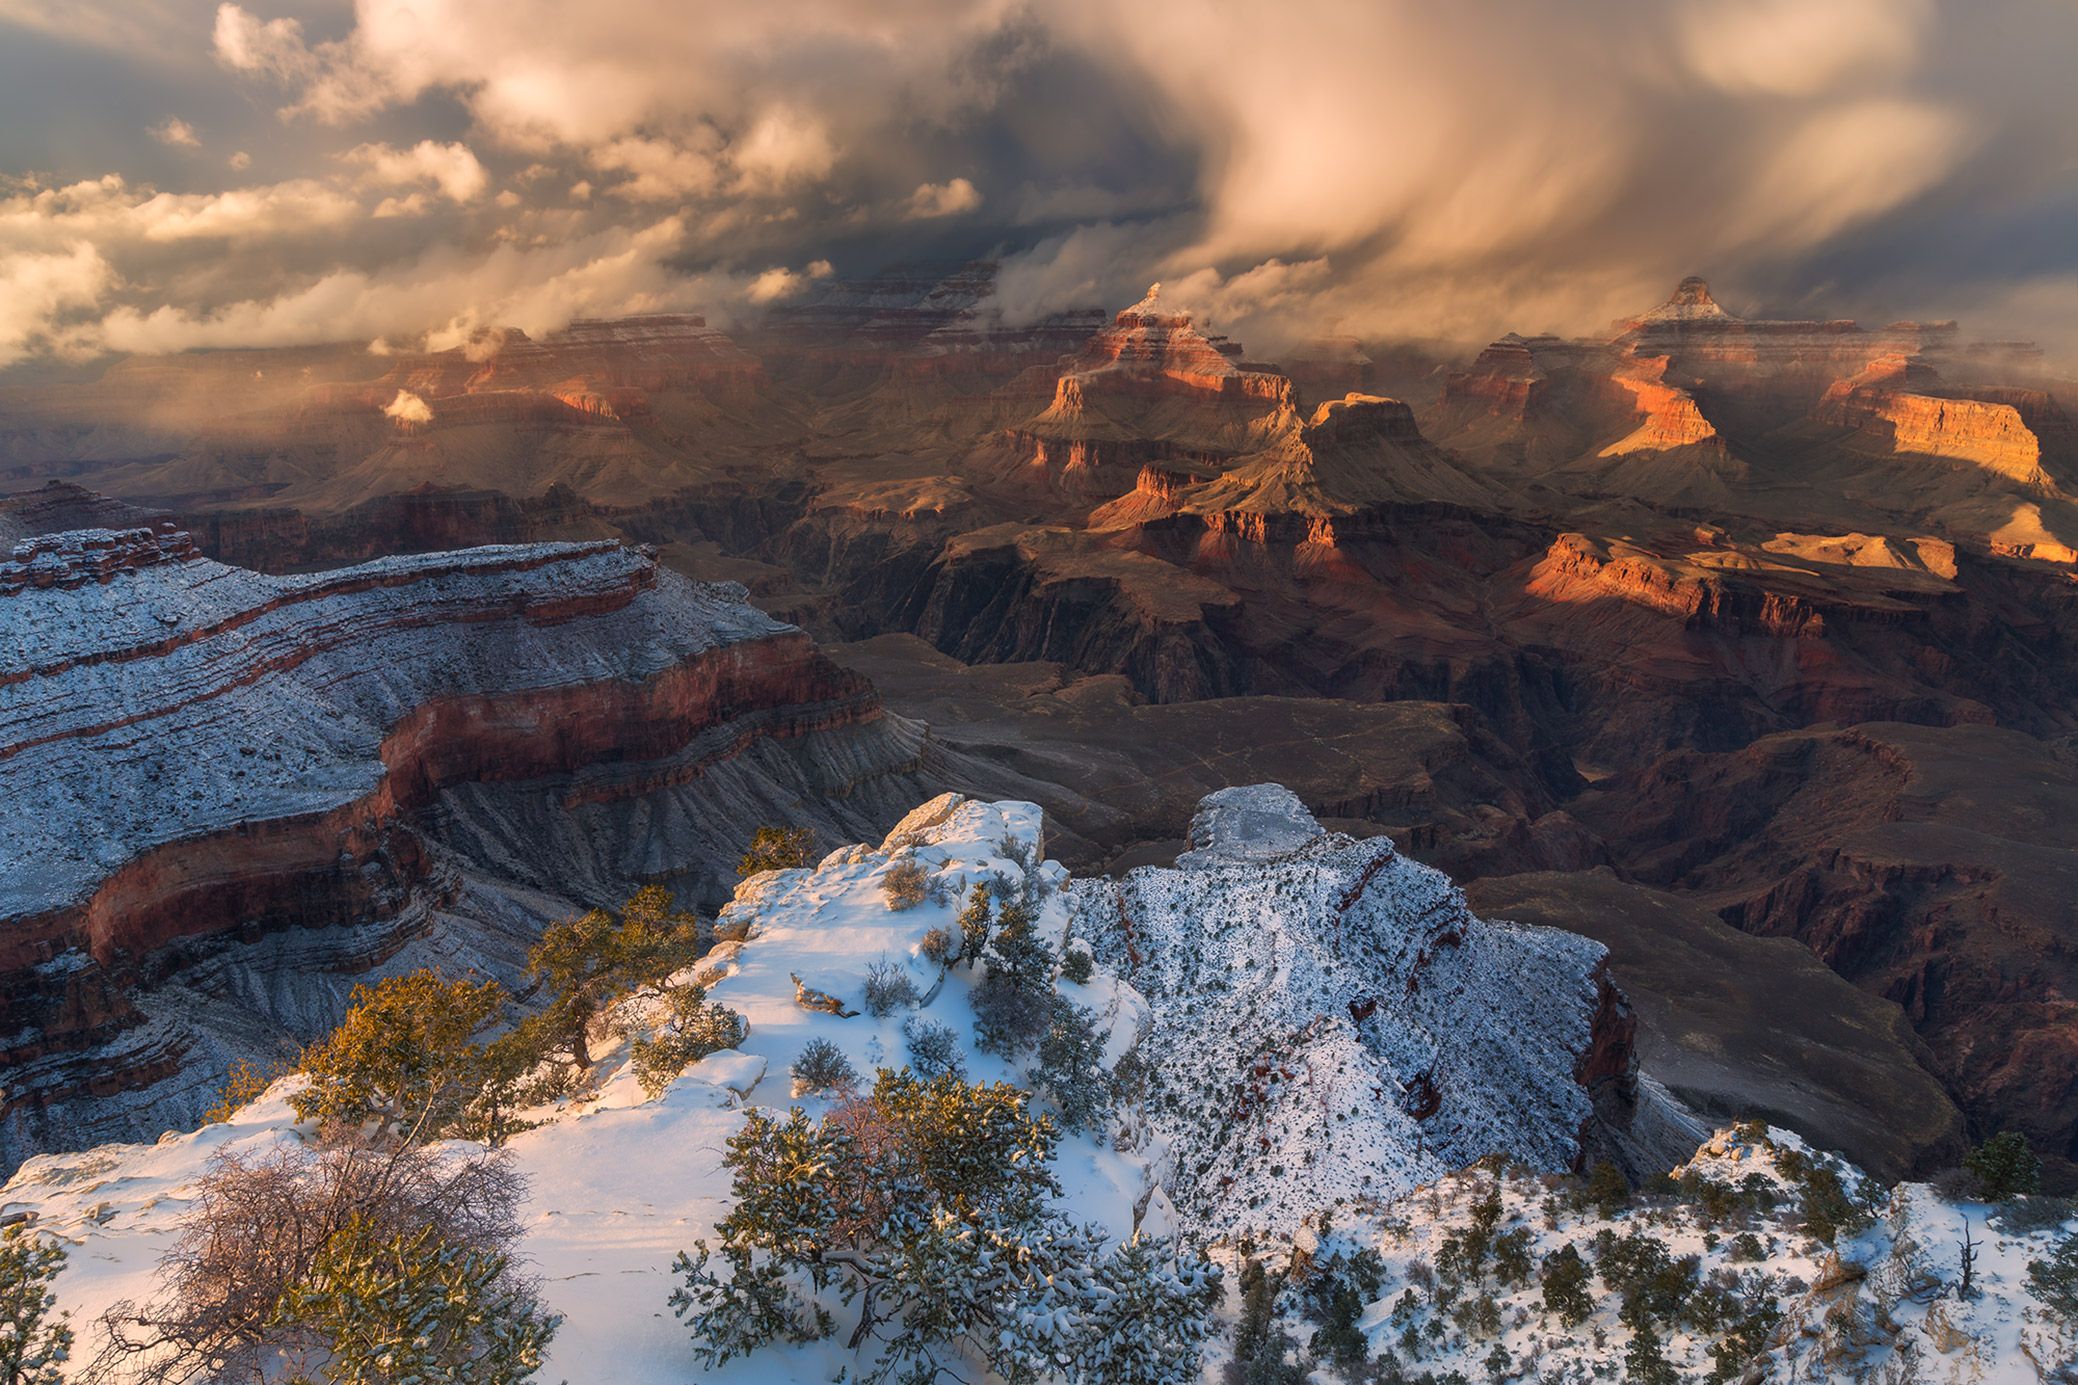 How to take amazing photo at Grand Canyon National Park